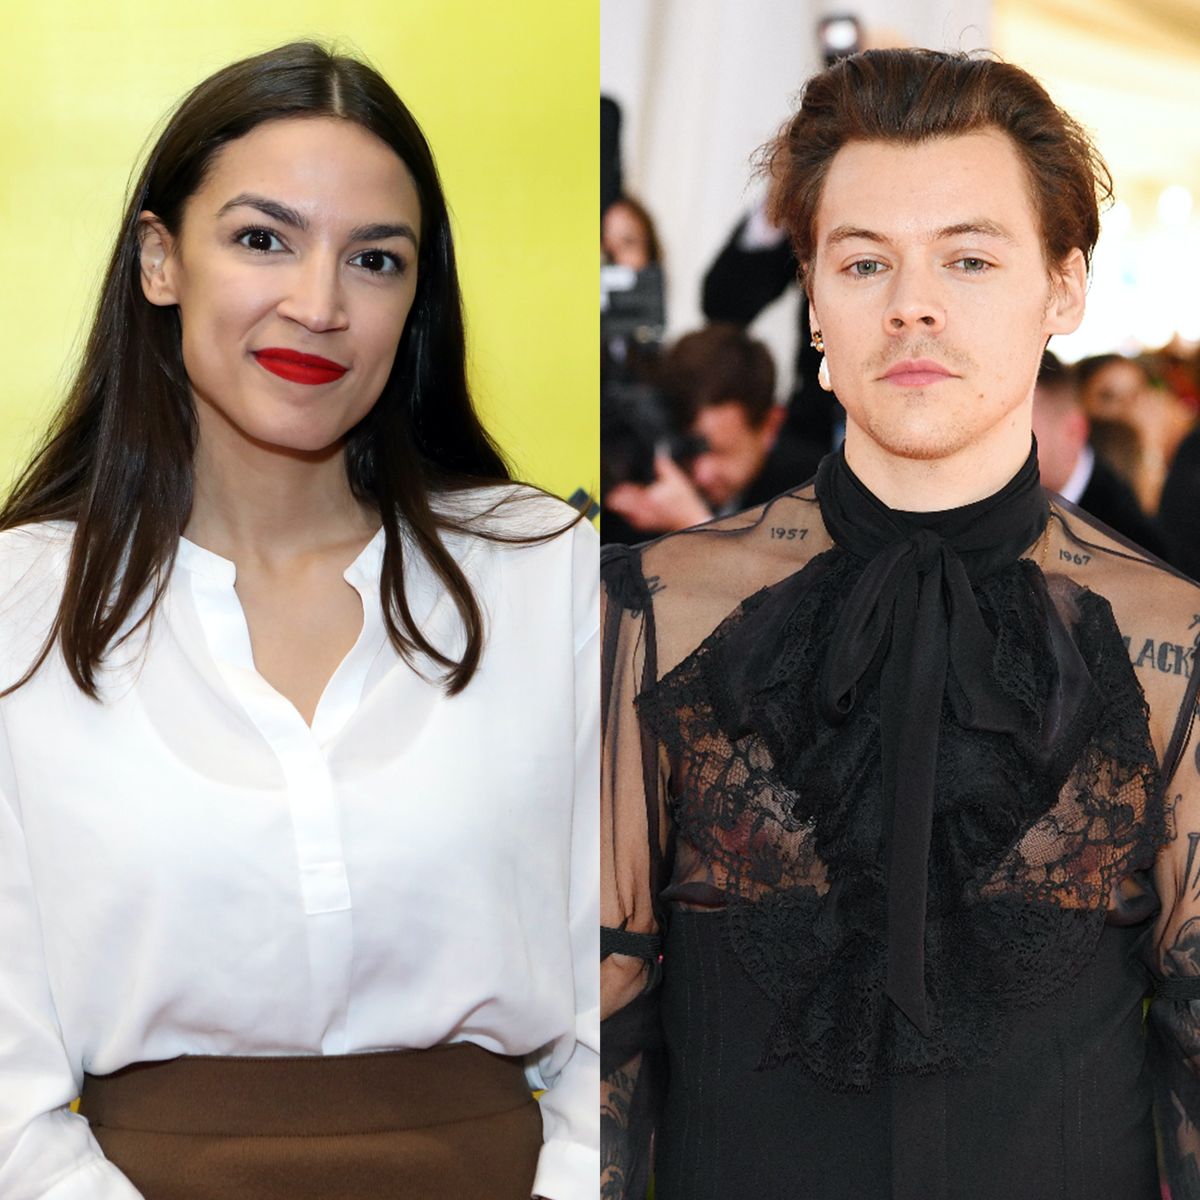 new york, new york   may 06  harry styles attends the 2019 met gala celebrating camp notes on fashion at metropolitan museum of art on may 06, 2019 in new york city photo by dimitrios kambourisgetty images for the met museumvogue